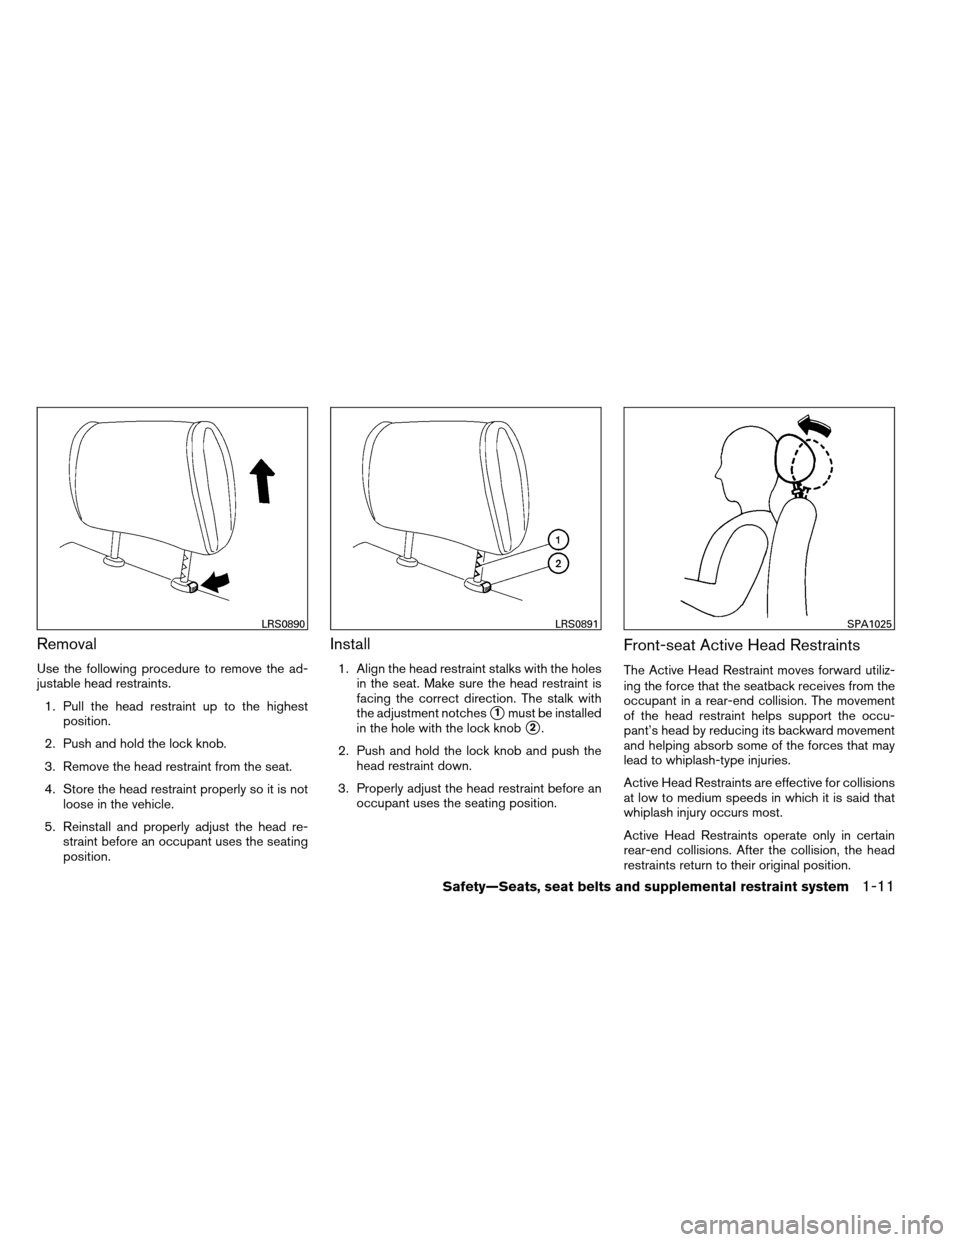 NISSAN ARMADA 2012 1.G Owners Manual Removal
Use the following procedure to remove the ad-
justable head restraints.1. Pull the head restraint up to the highest position.
2. Push and hold the lock knob.
3. Remove the head restraint from 